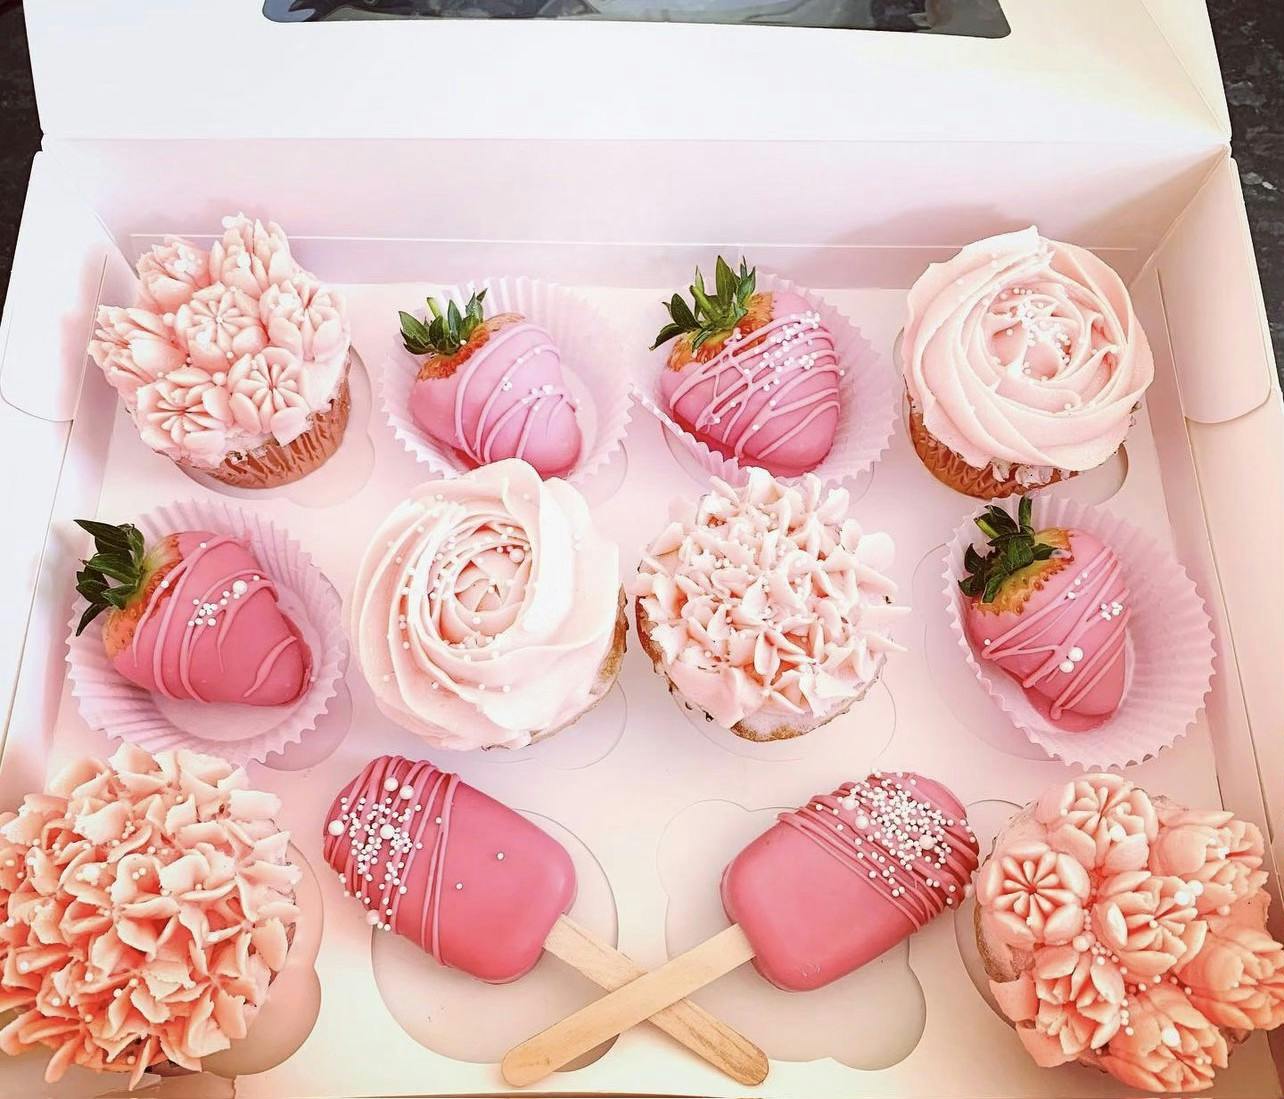 Pink flowery cupcakes, pink cake pops with cake pearls, and pink chocolate covered strawberries